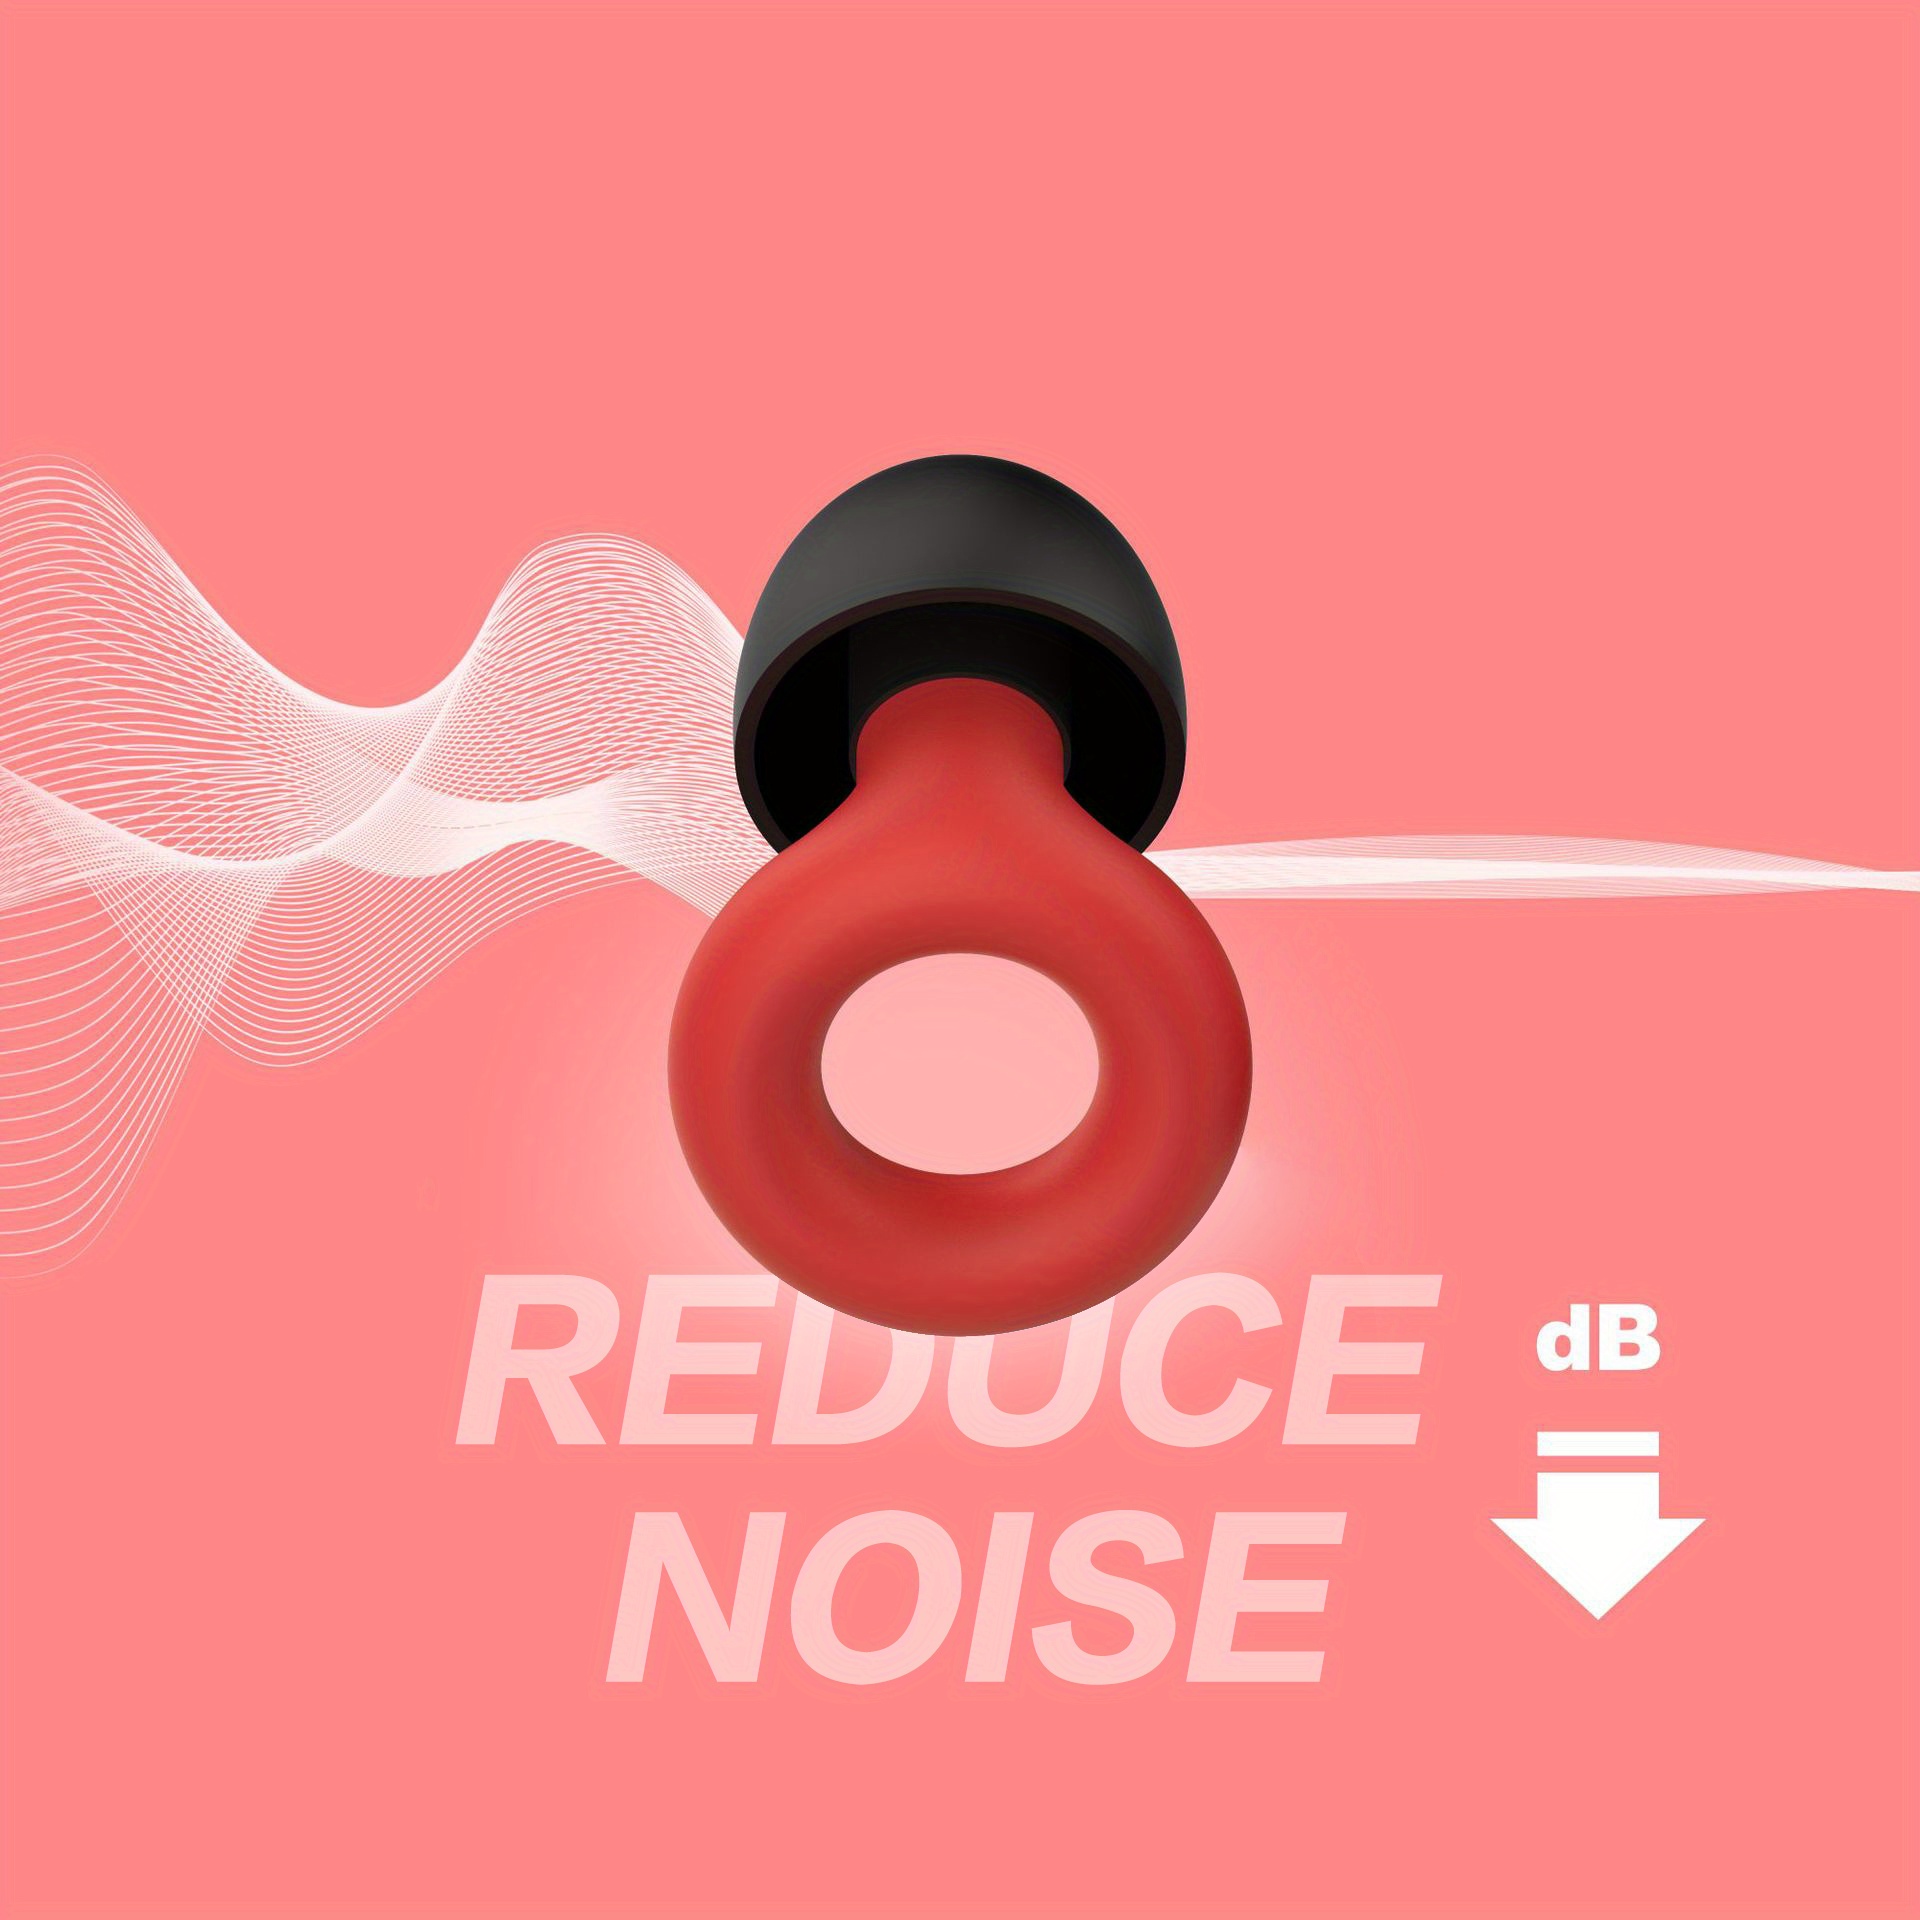 

1set Loop Quiet Ear Plugs For Noise Reduction Super Soft Reusable Hearing Protection In Flexible Silicone For Sleep Noise Sensitivity 6 Ear Tips In S/m/l